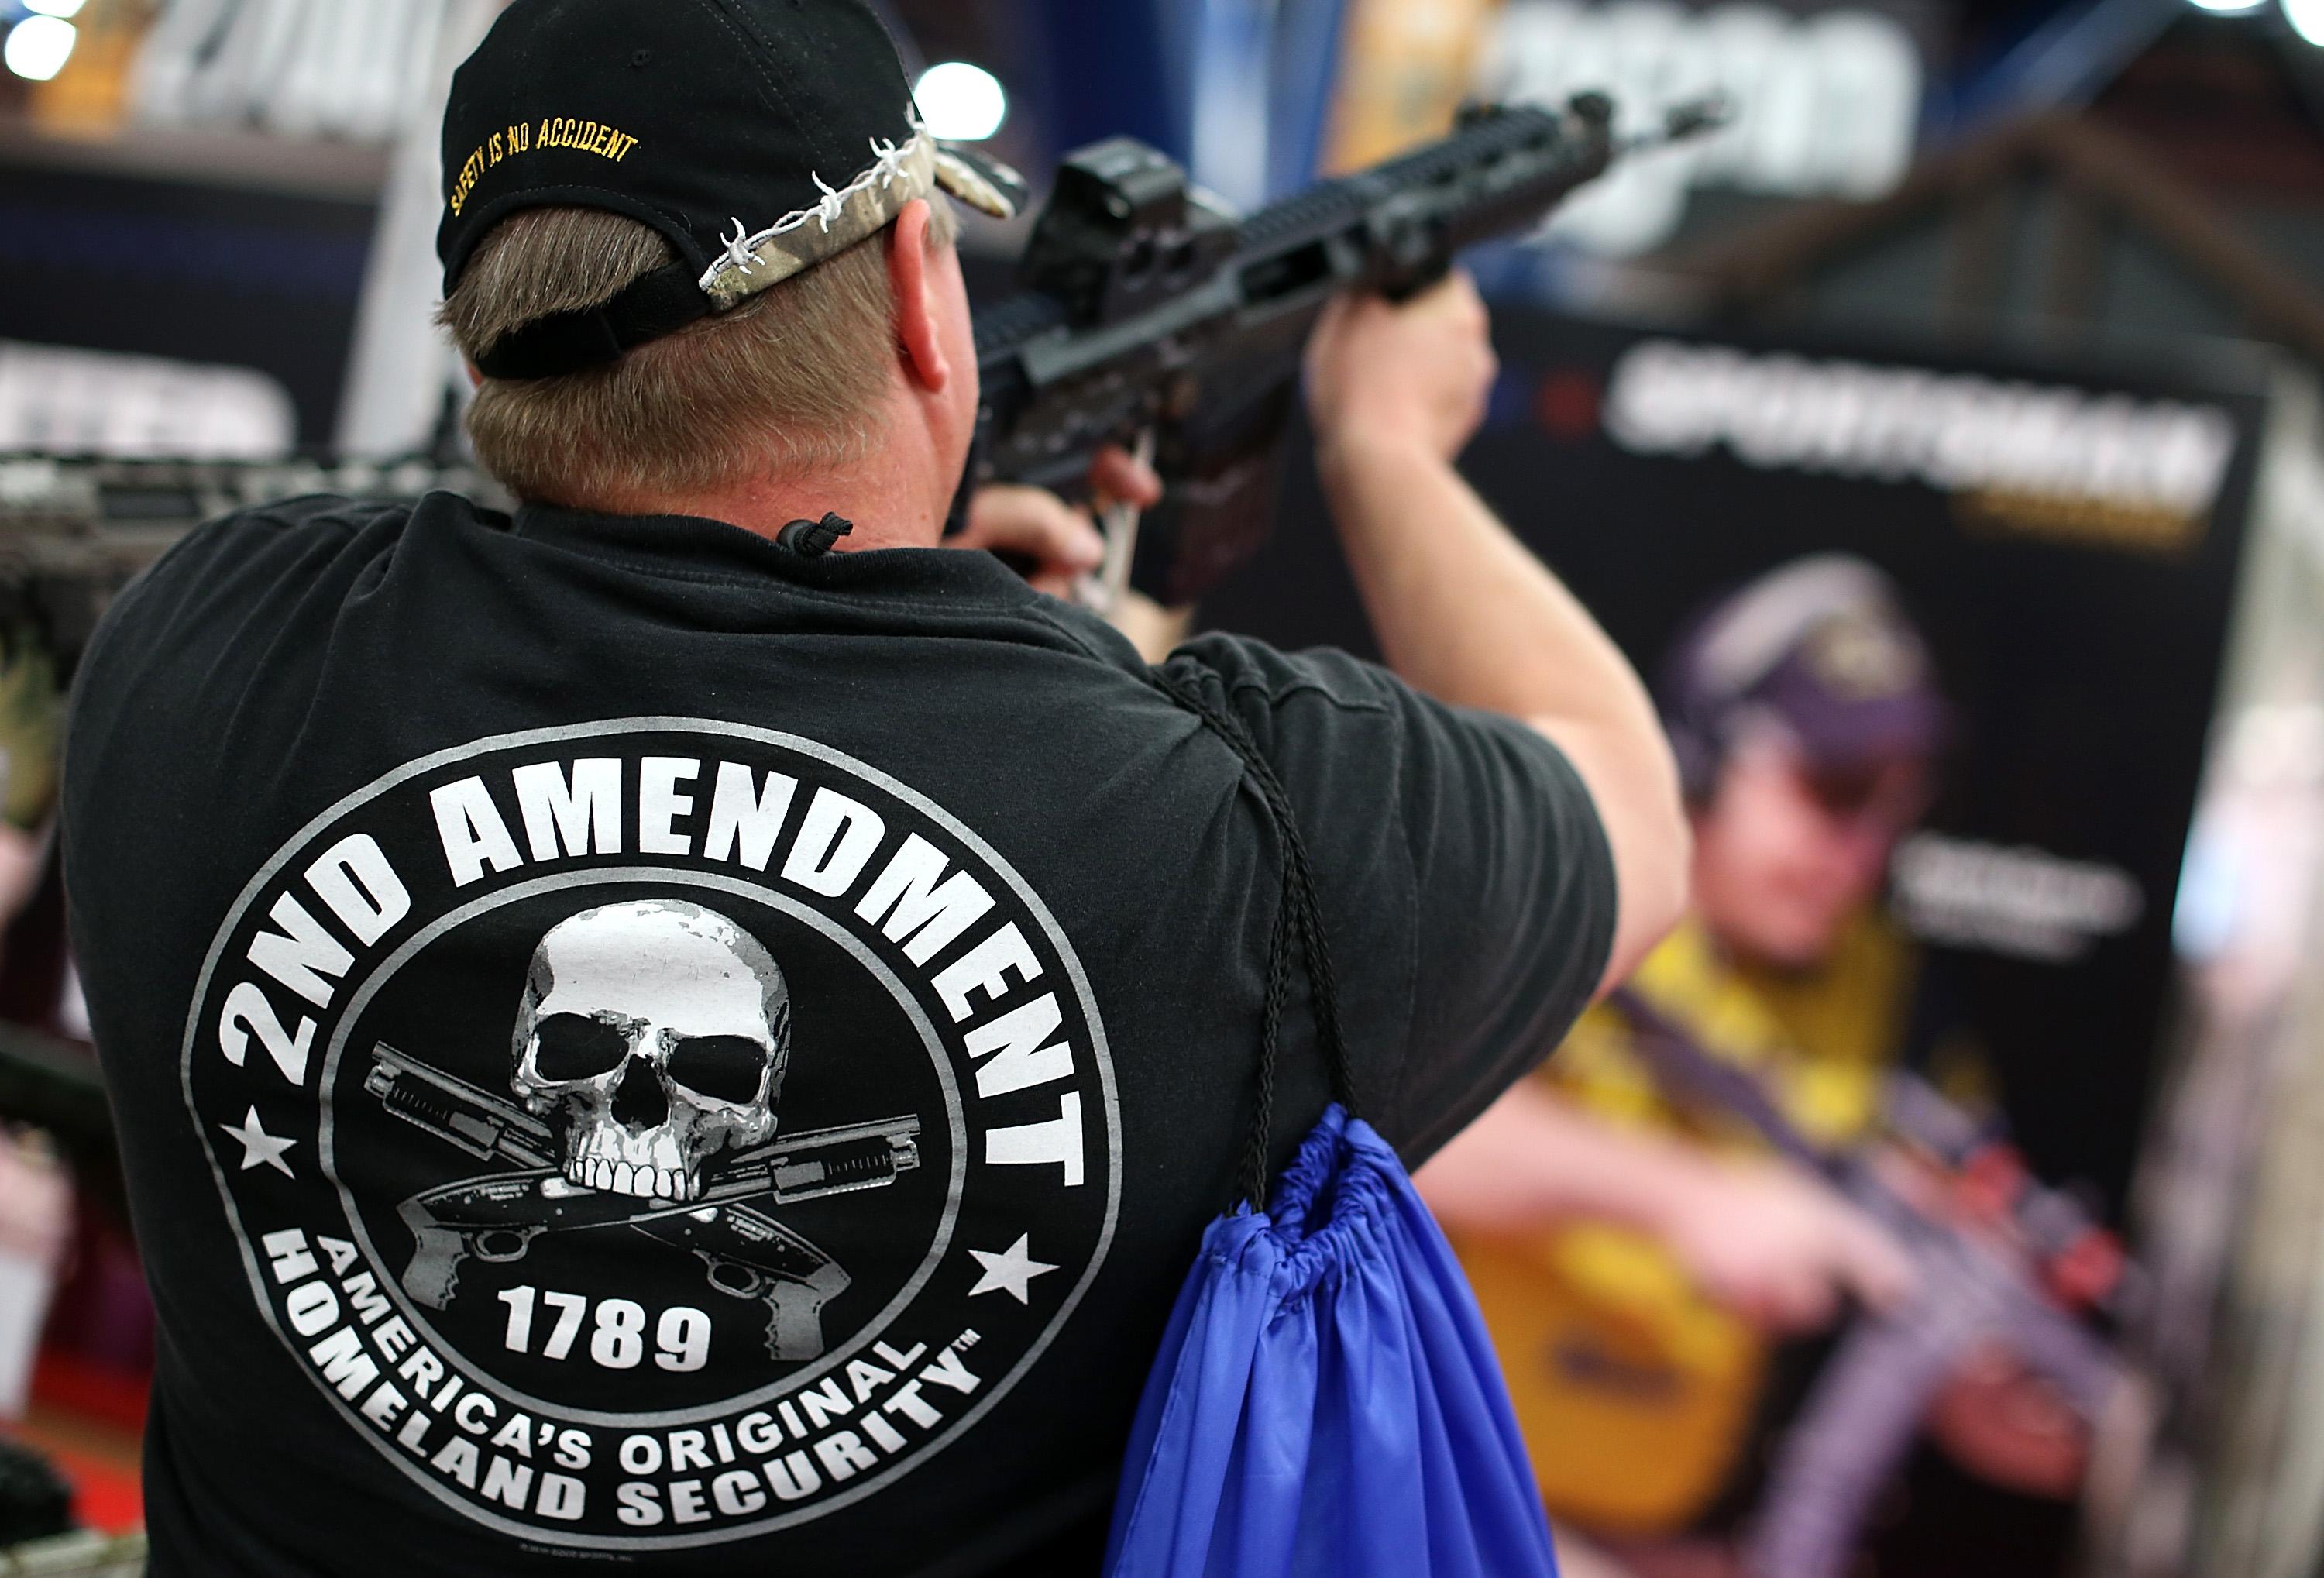 An attendee wears a 2nd amendment shirt while inspecting an assault rifle during the 2013 NRA Annual Meeting and Exhibits at the George R. Brown Convention Center